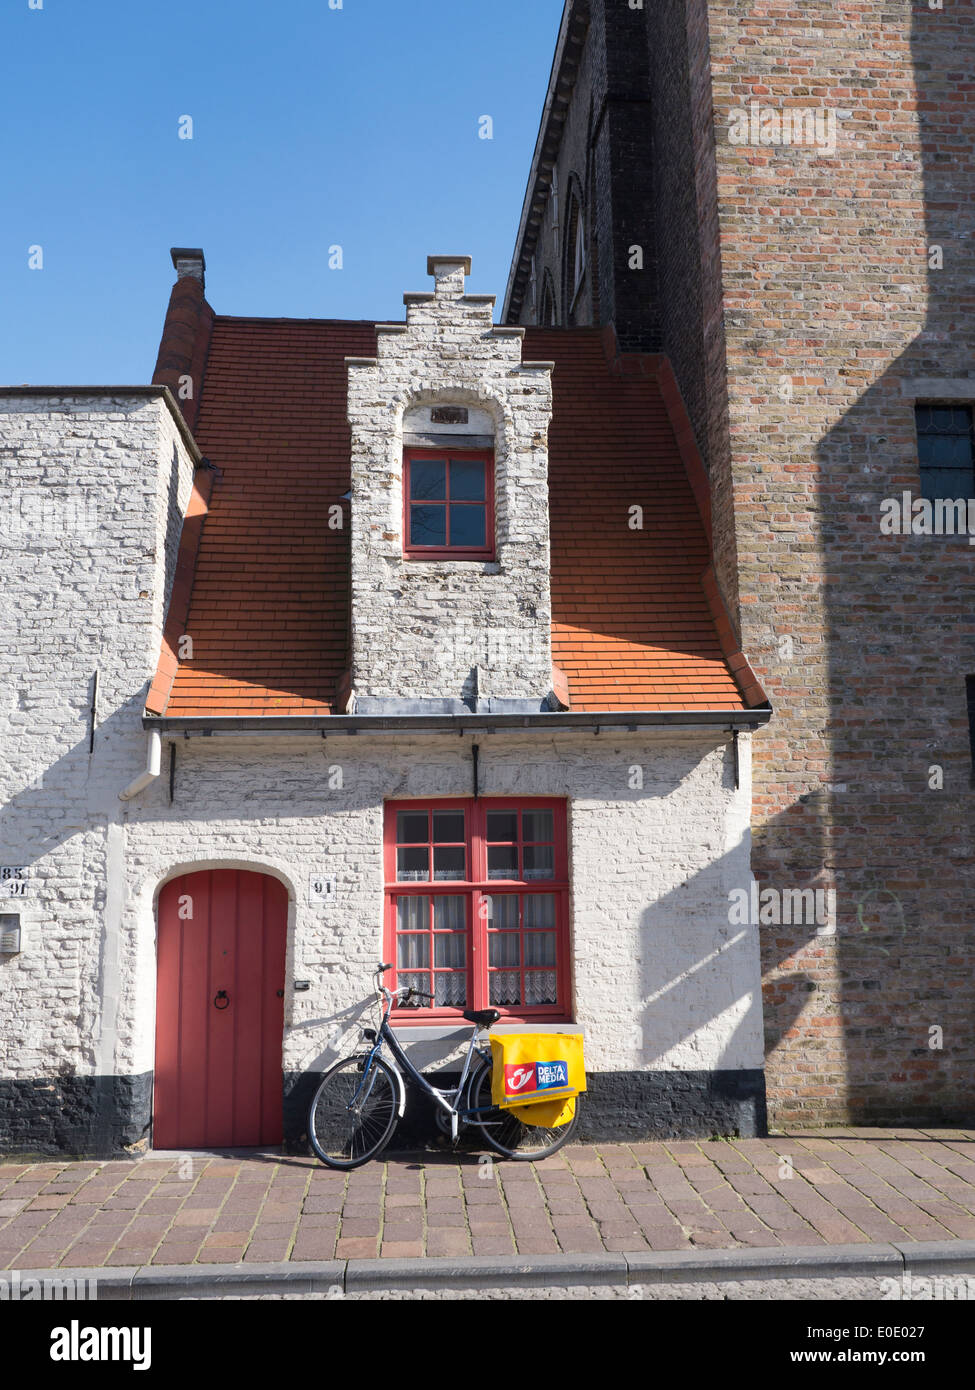 Delivery bicycle parked outside a typical old building in Bruges, belgium Stock Photo